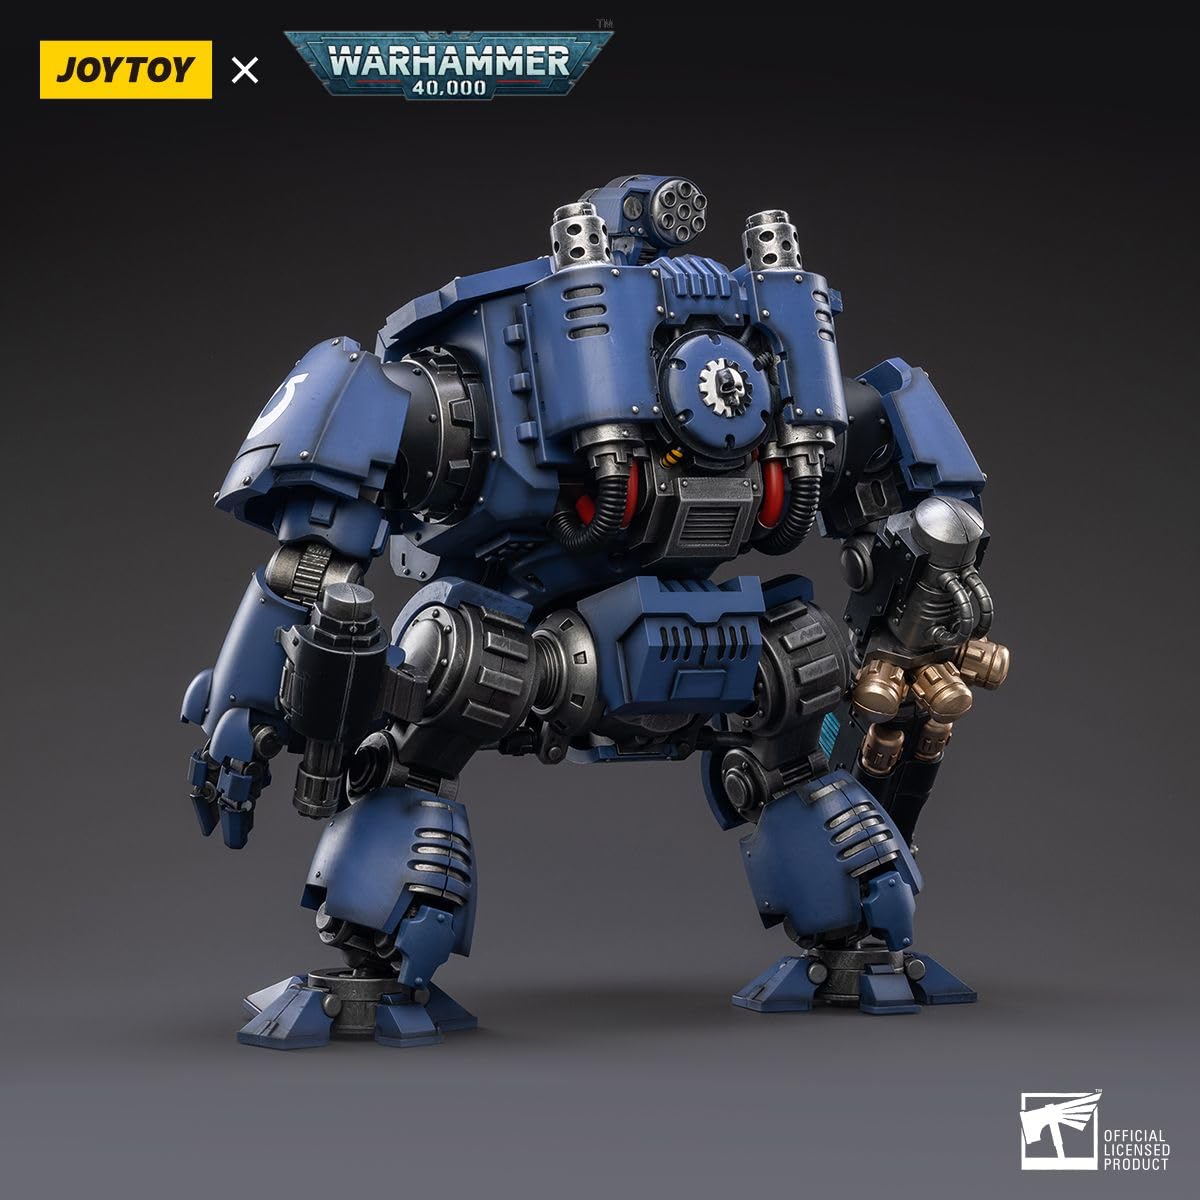 JOYTOY 1/18 Warhammer 40,000 Action Figure UItramarines Redemptor Dreadnought Brother Dreadnought Tyleas Collection Model